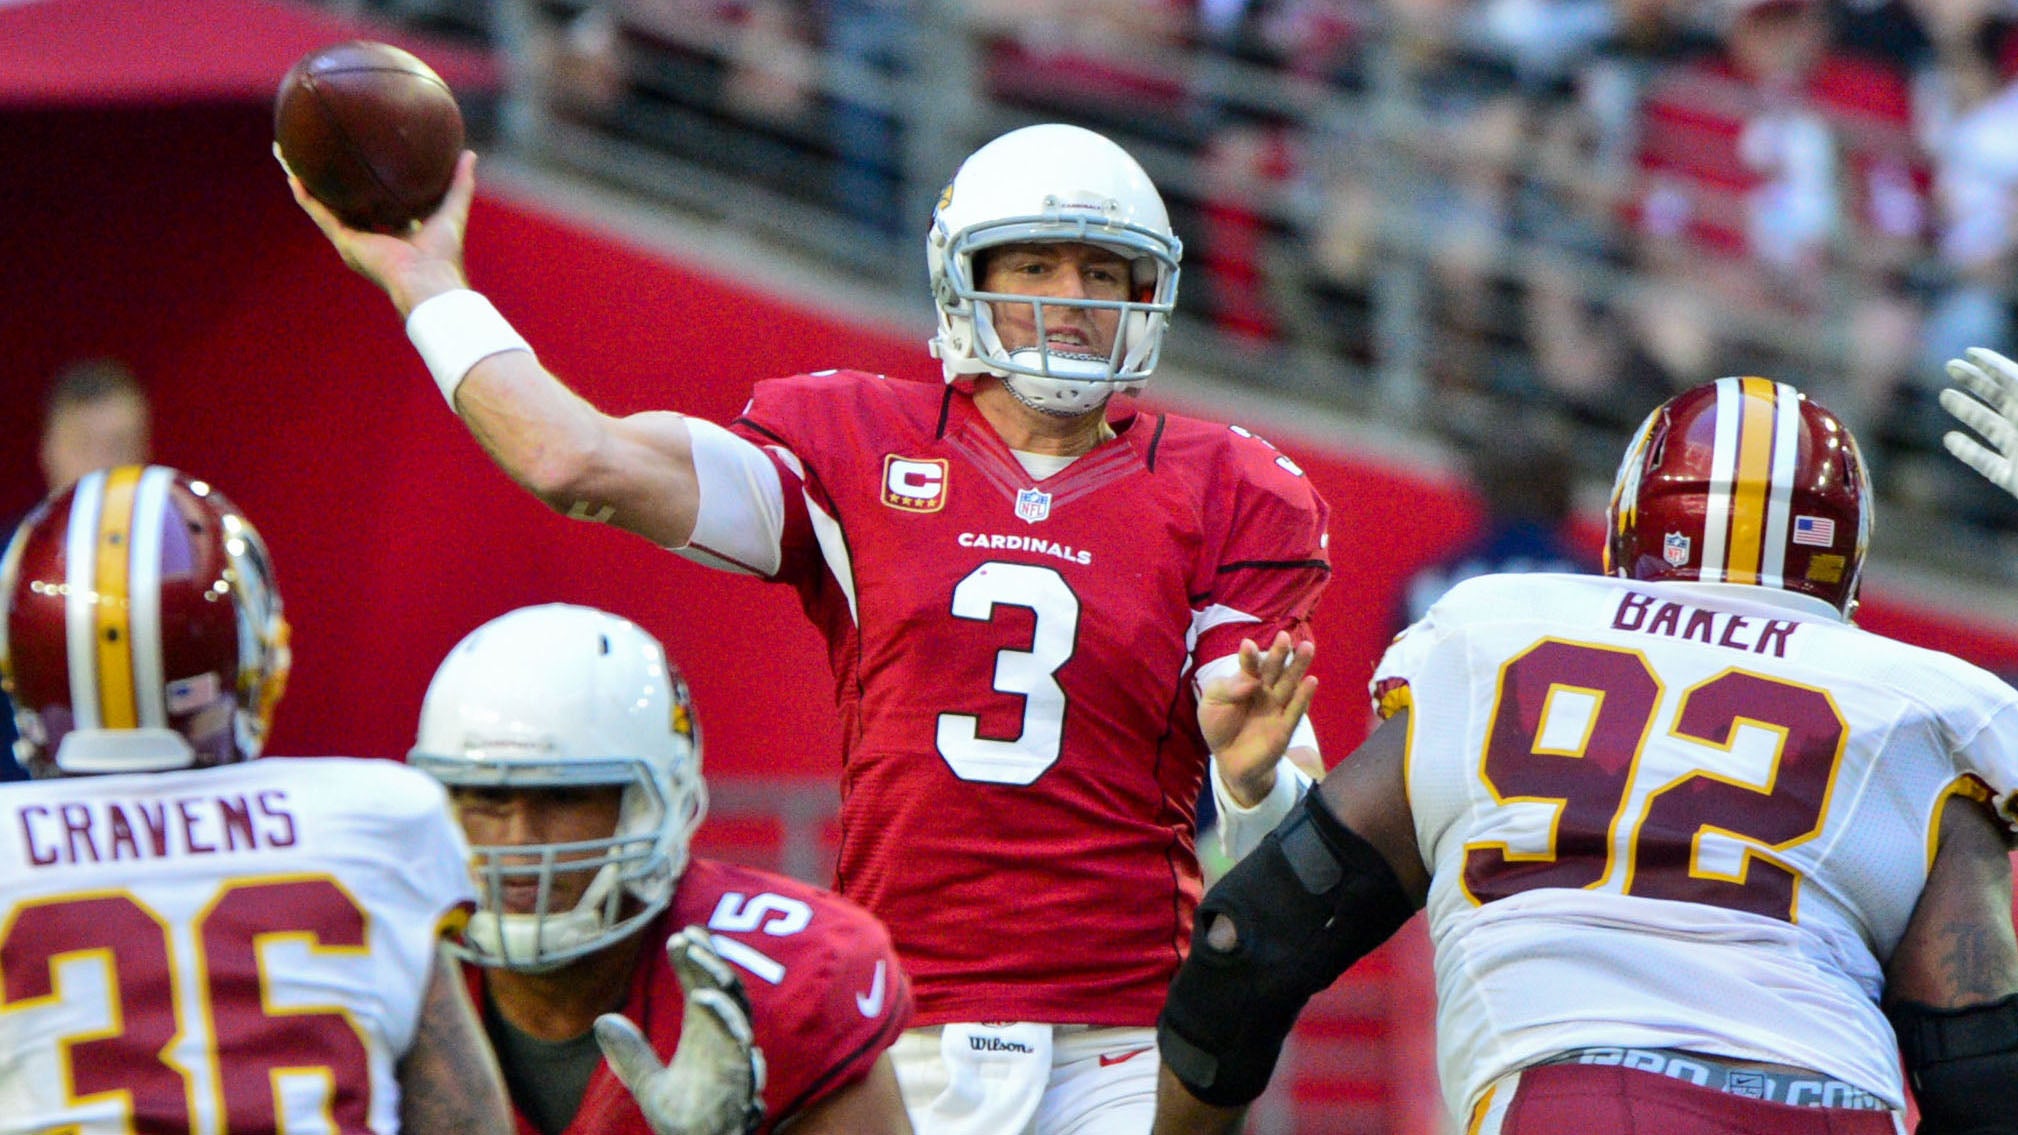 Top 3 potential uniform redesigns for the Arizona Cardinals